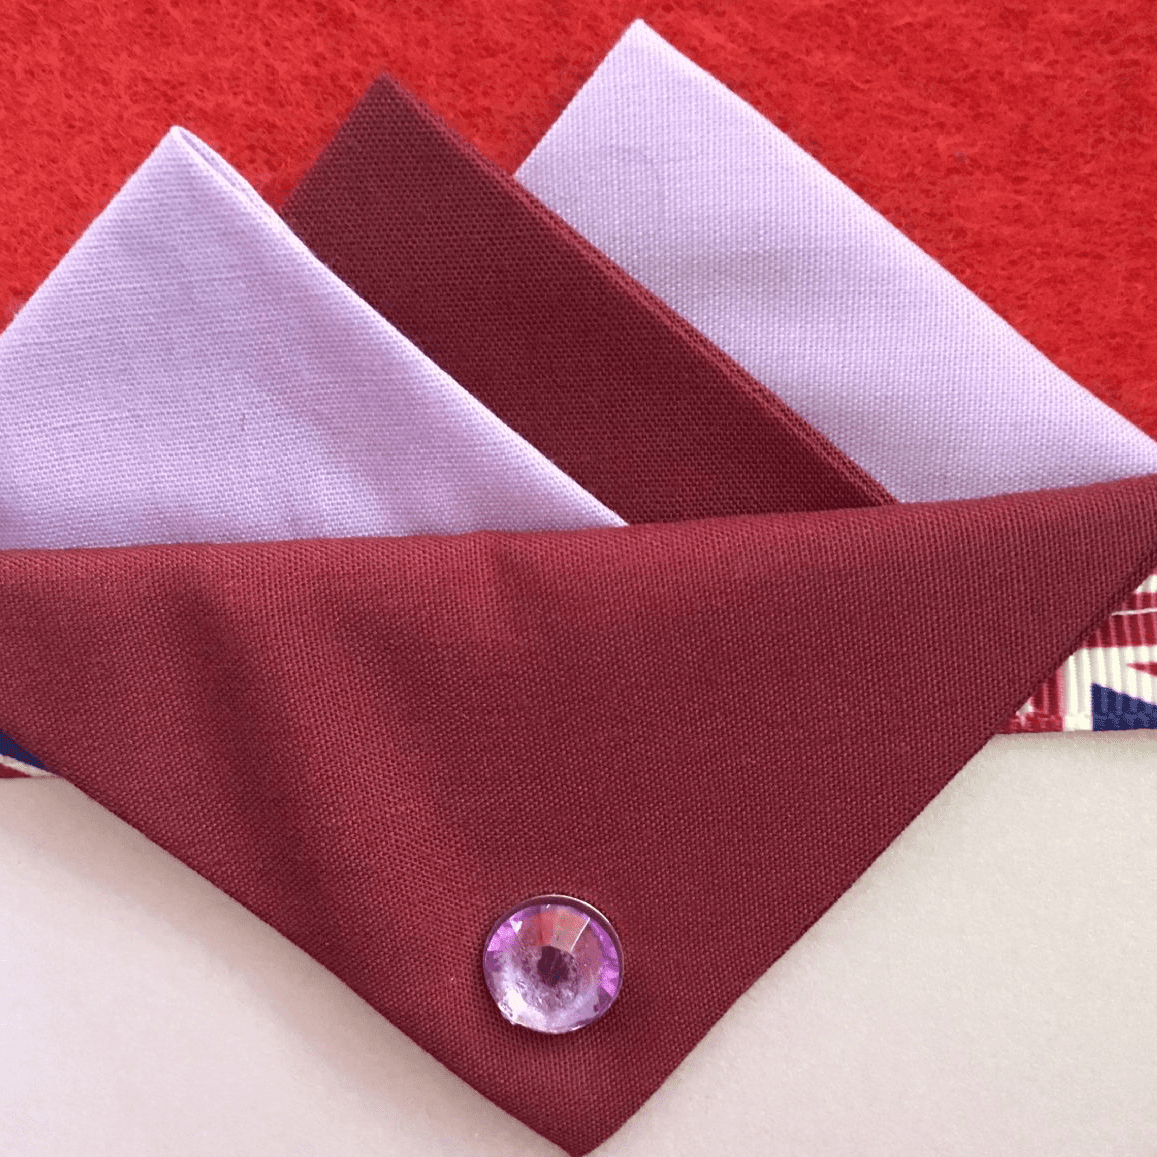 Lilac And Burgundy Hankie With Burgundy Flap And Pin